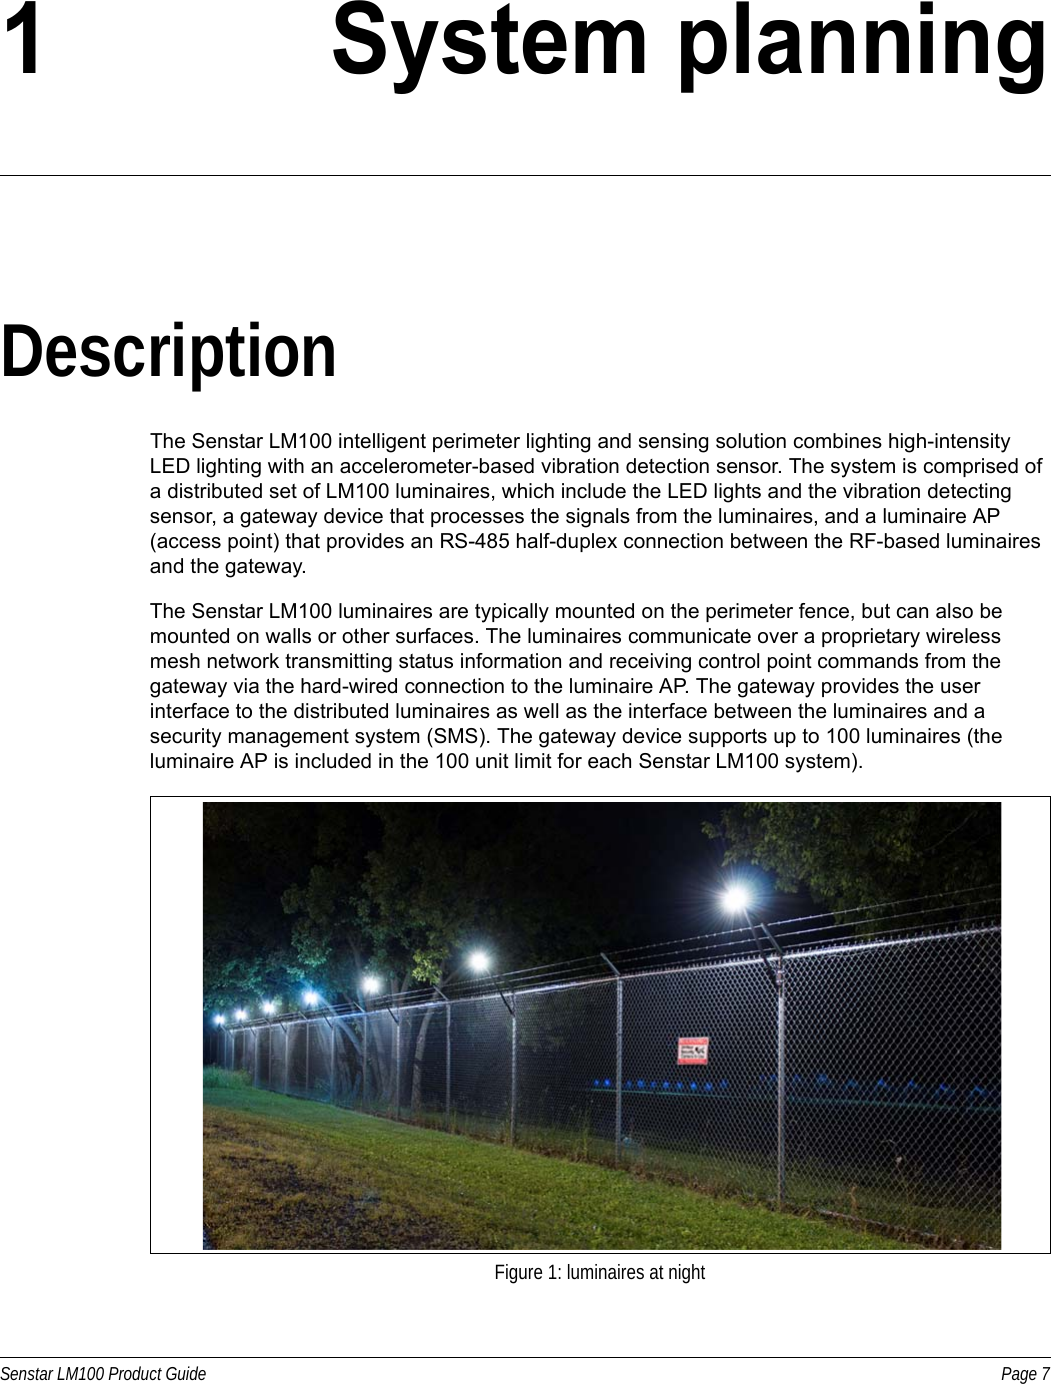 Senstar LM100 Product Guide Page 71 System planningDescriptionThe Senstar LM100 intelligent perimeter lighting and sensing solution combines high-intensity LED lighting with an accelerometer-based vibration detection sensor. The system is comprised of a distributed set of LM100 luminaires, which include the LED lights and the vibration detecting sensor, a gateway device that processes the signals from the luminaires, and a luminaire AP (access point) that provides an RS-485 half-duplex connection between the RF-based luminaires and the gateway. The Senstar LM100 luminaires are typically mounted on the perimeter fence, but can also be mounted on walls or other surfaces. The luminaires communicate over a proprietary wireless mesh network transmitting status information and receiving control point commands from the gateway via the hard-wired connection to the luminaire AP. The gateway provides the user interface to the distributed luminaires as well as the interface between the luminaires and a security management system (SMS). The gateway device supports up to 100 luminaires (the luminaire AP is included in the 100 unit limit for each Senstar LM100 system). Figure 1: luminaires at night